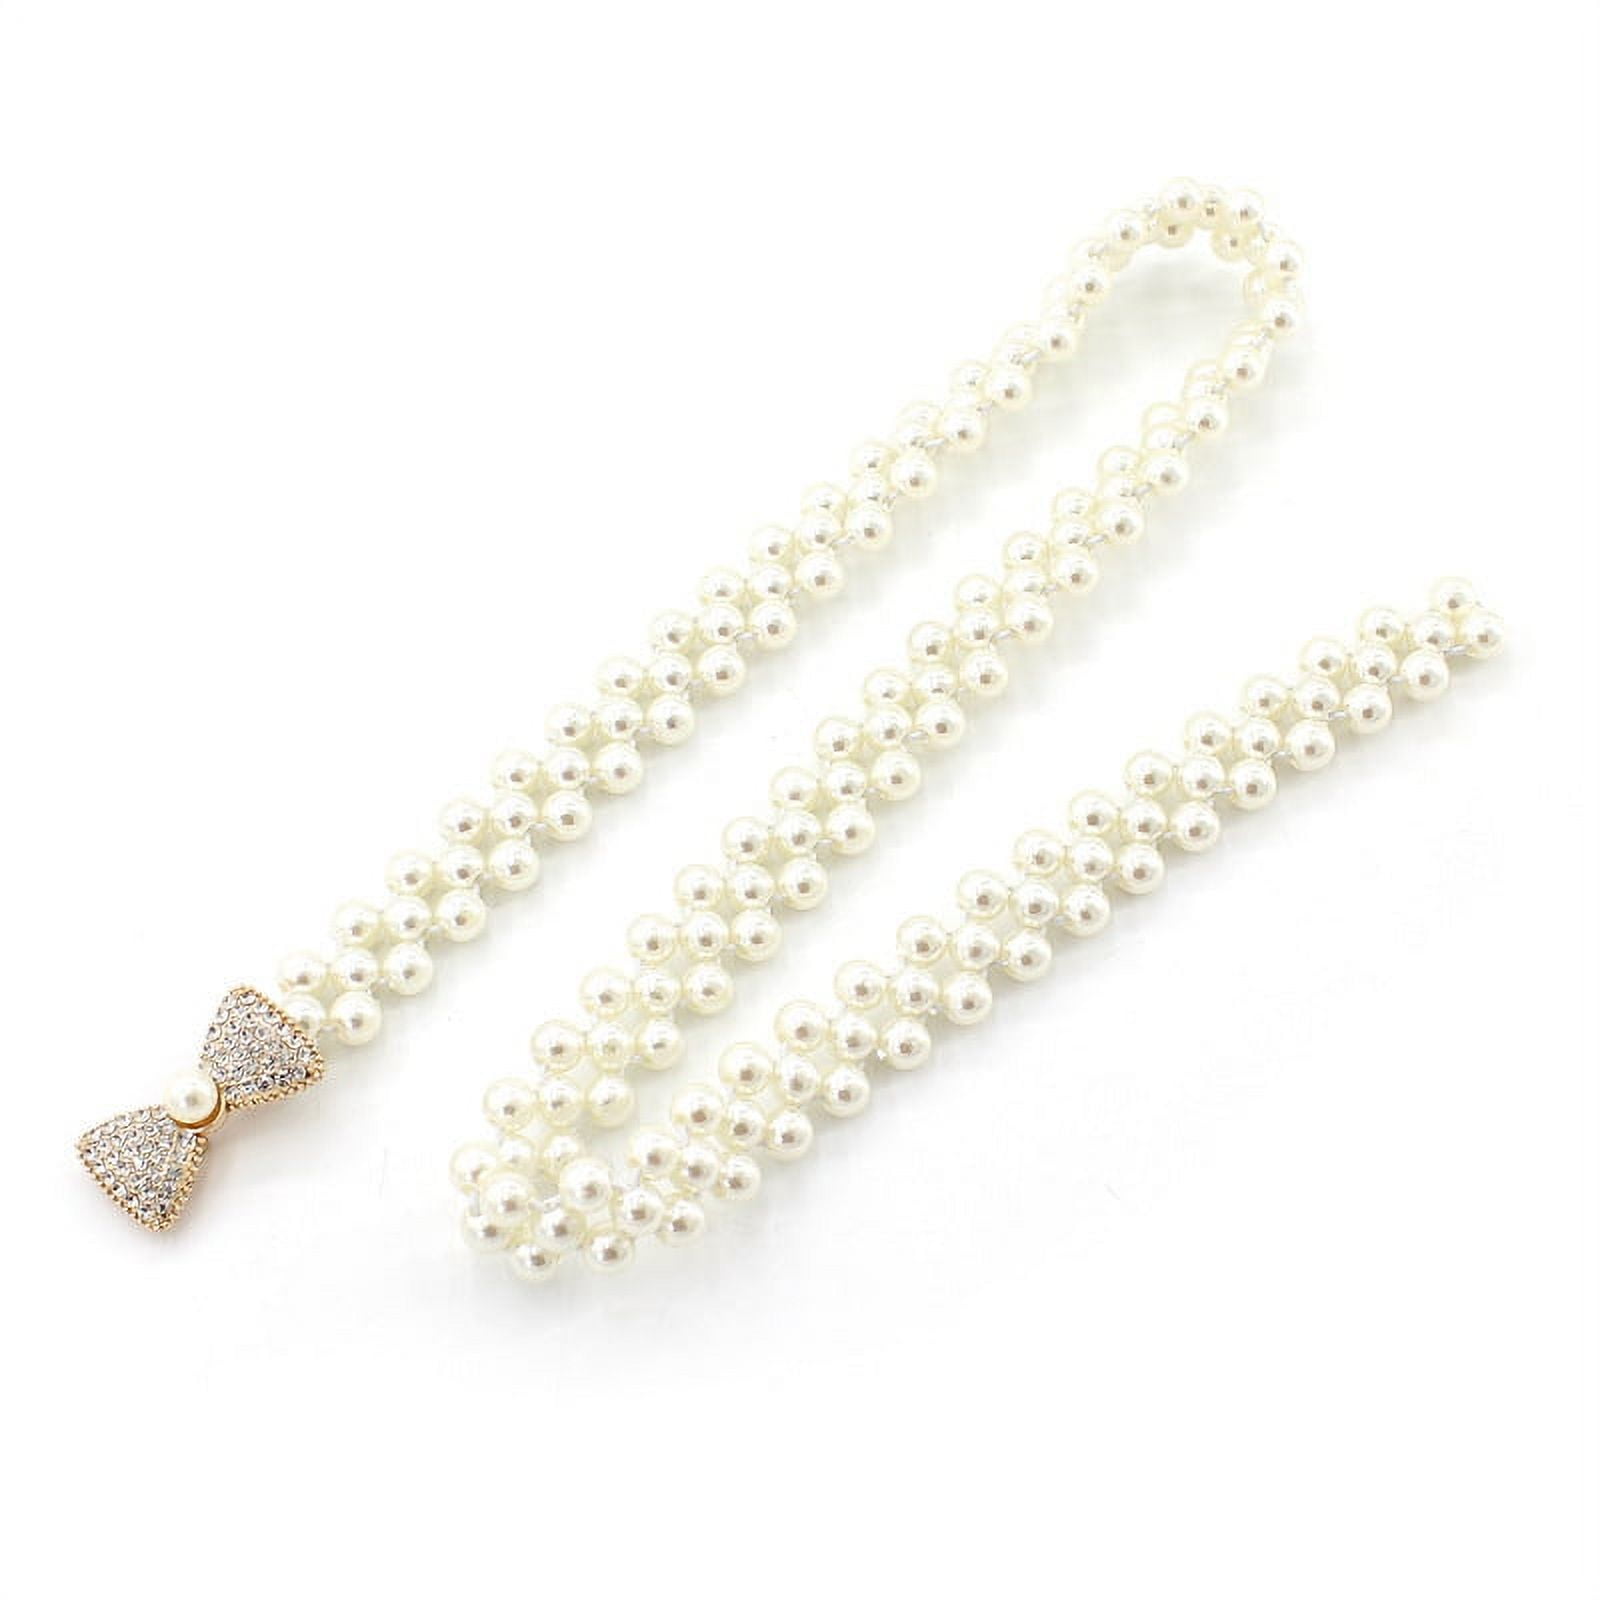 Crystal Pearl Waist Belt For Women Elegant Elastic Buckle With Chain For  Baby Shower Dresses And Special Occasions From Swkfactory_store, $1.9